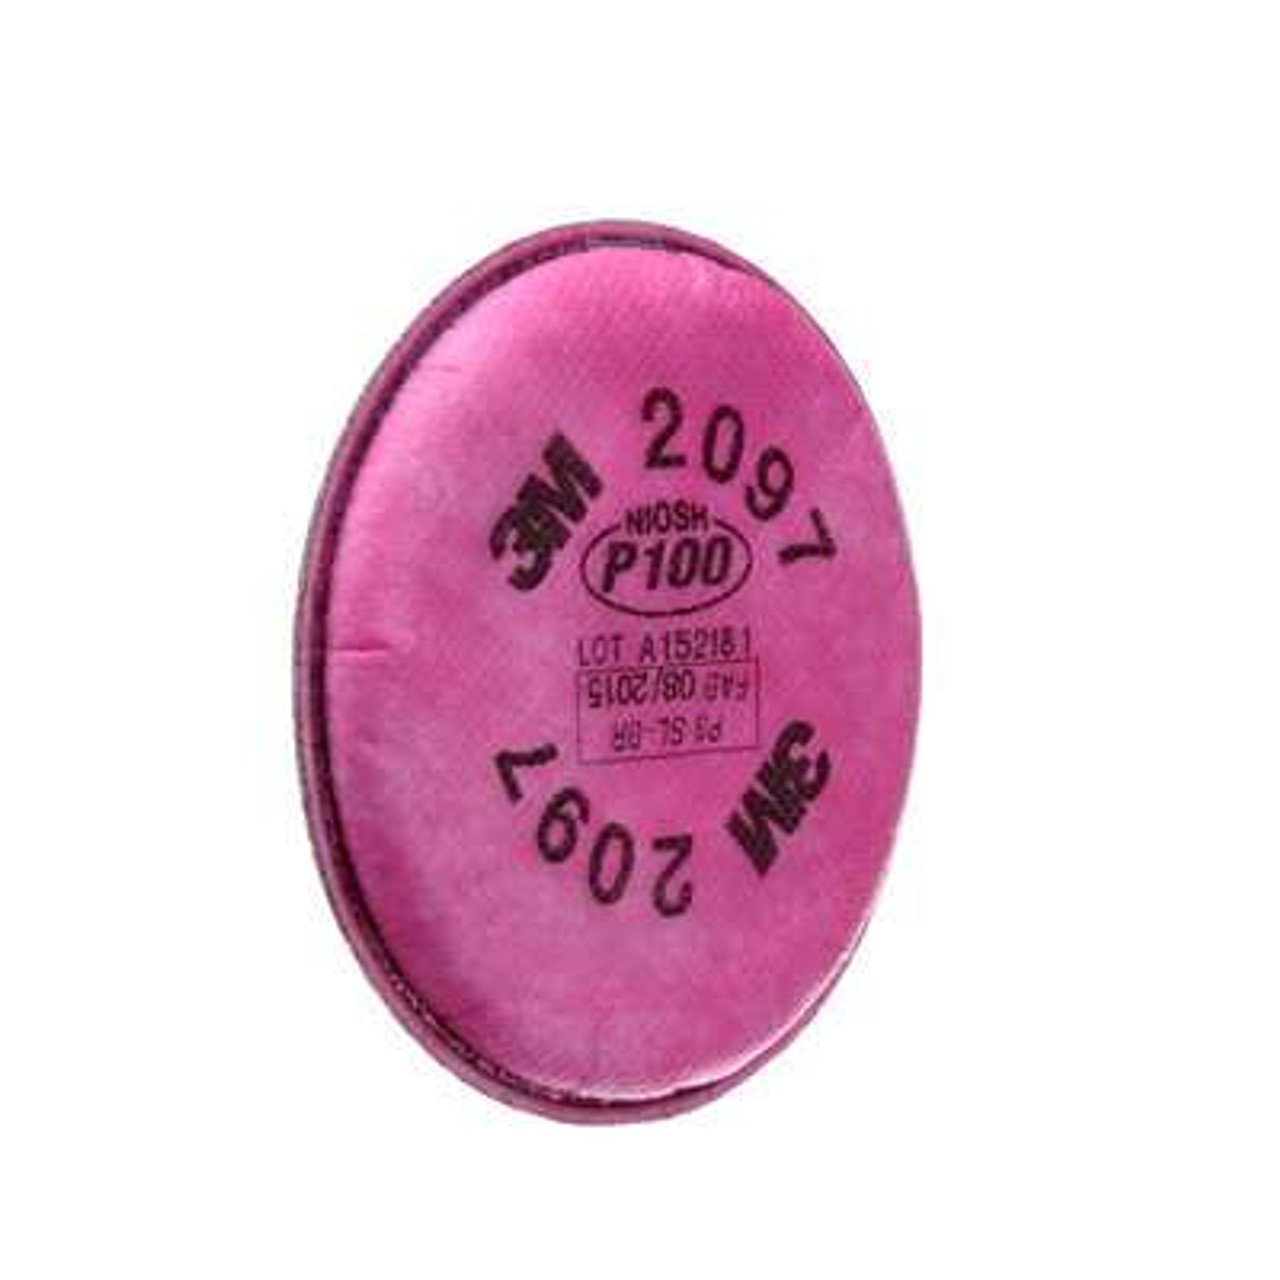 3M 2097 P100 Particulate Filter with Organic Vapor Relief, BX/2, BX